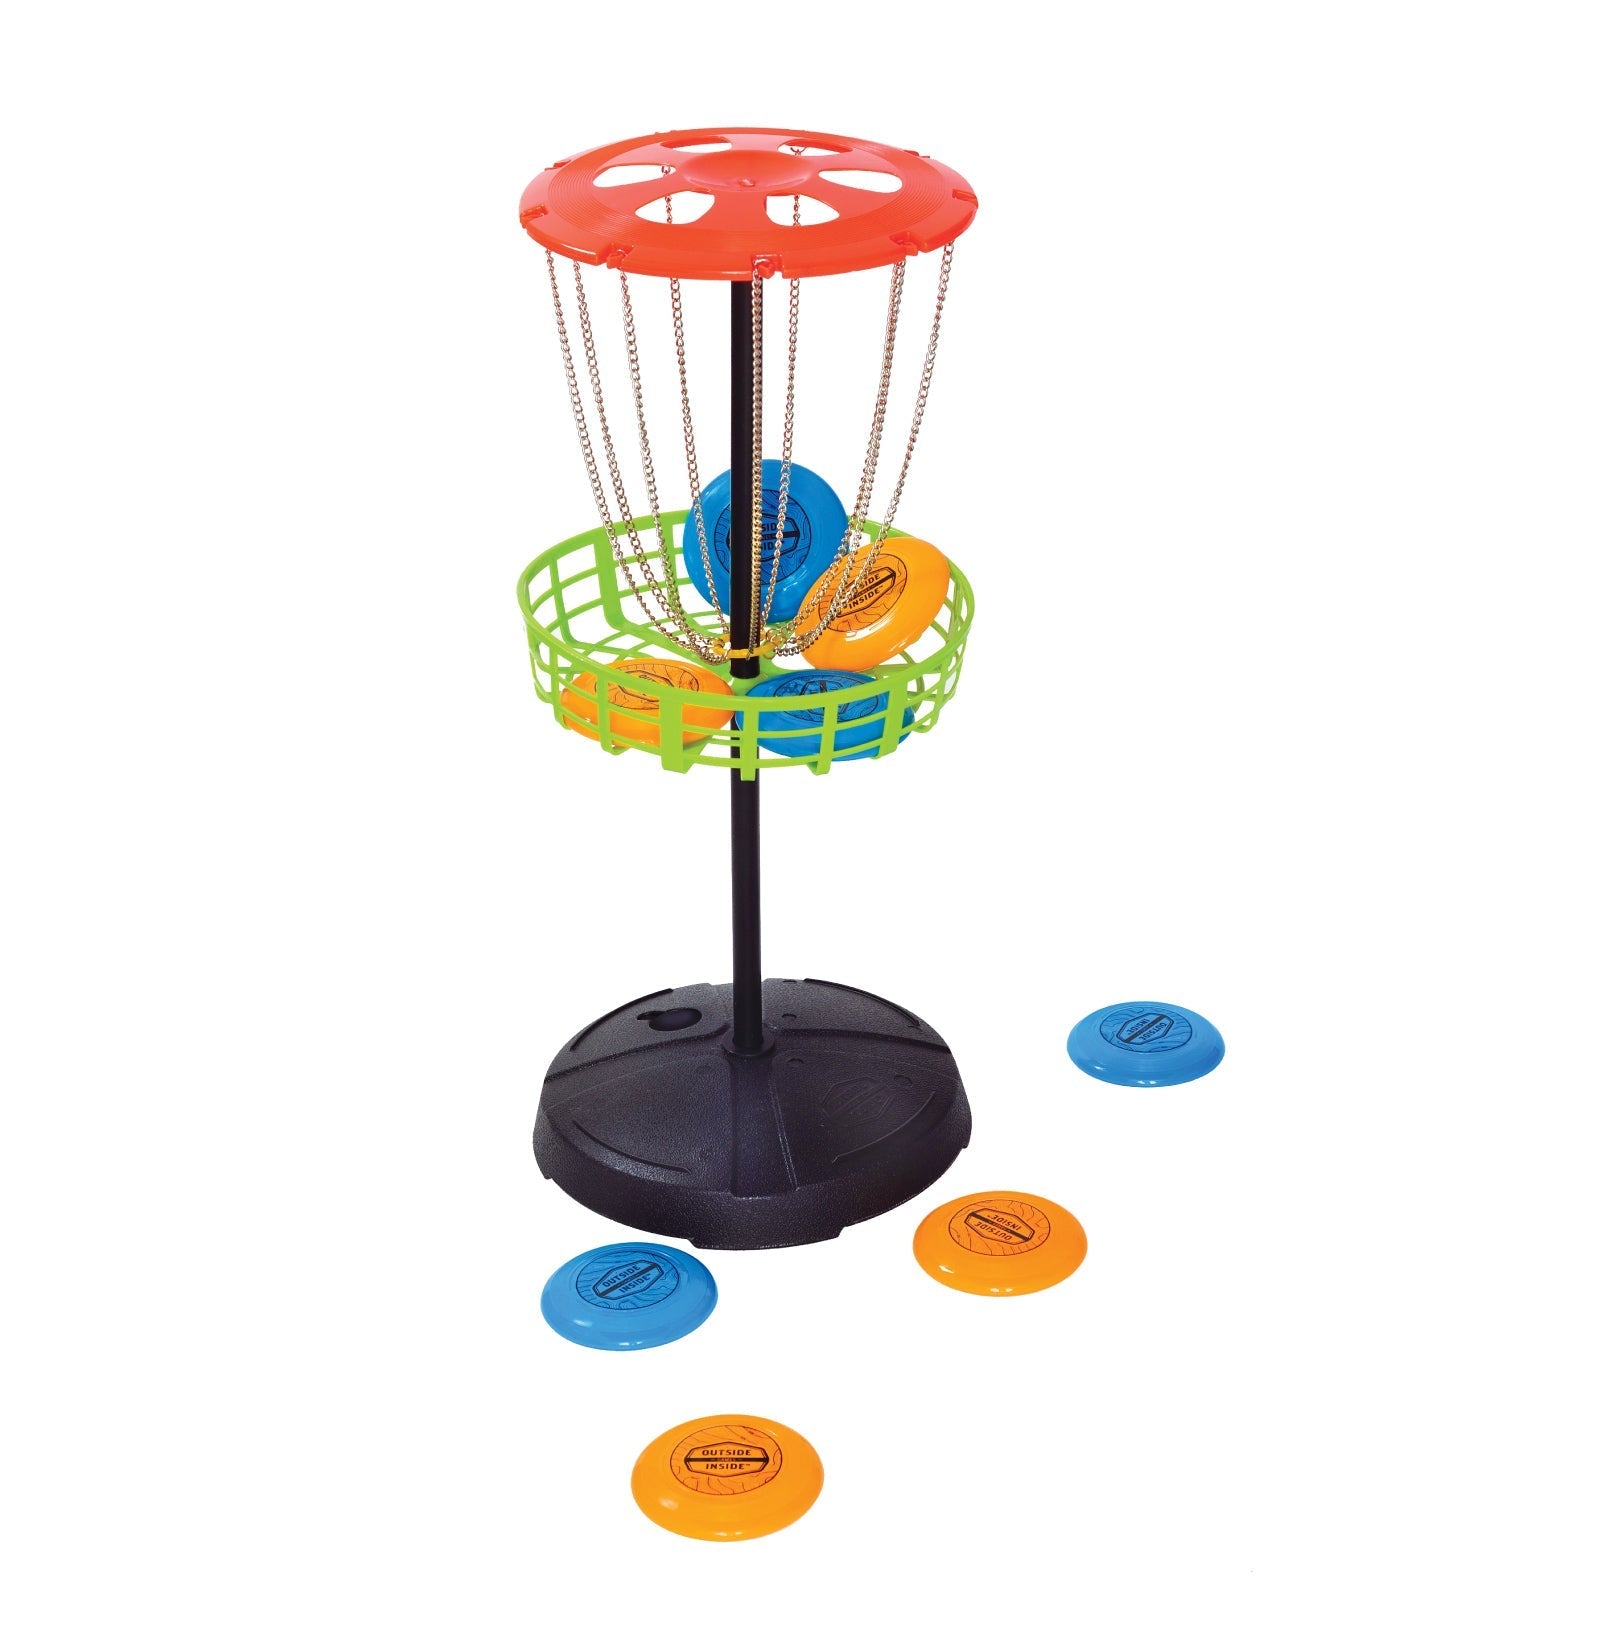 FREESTYLE DISK GOLF